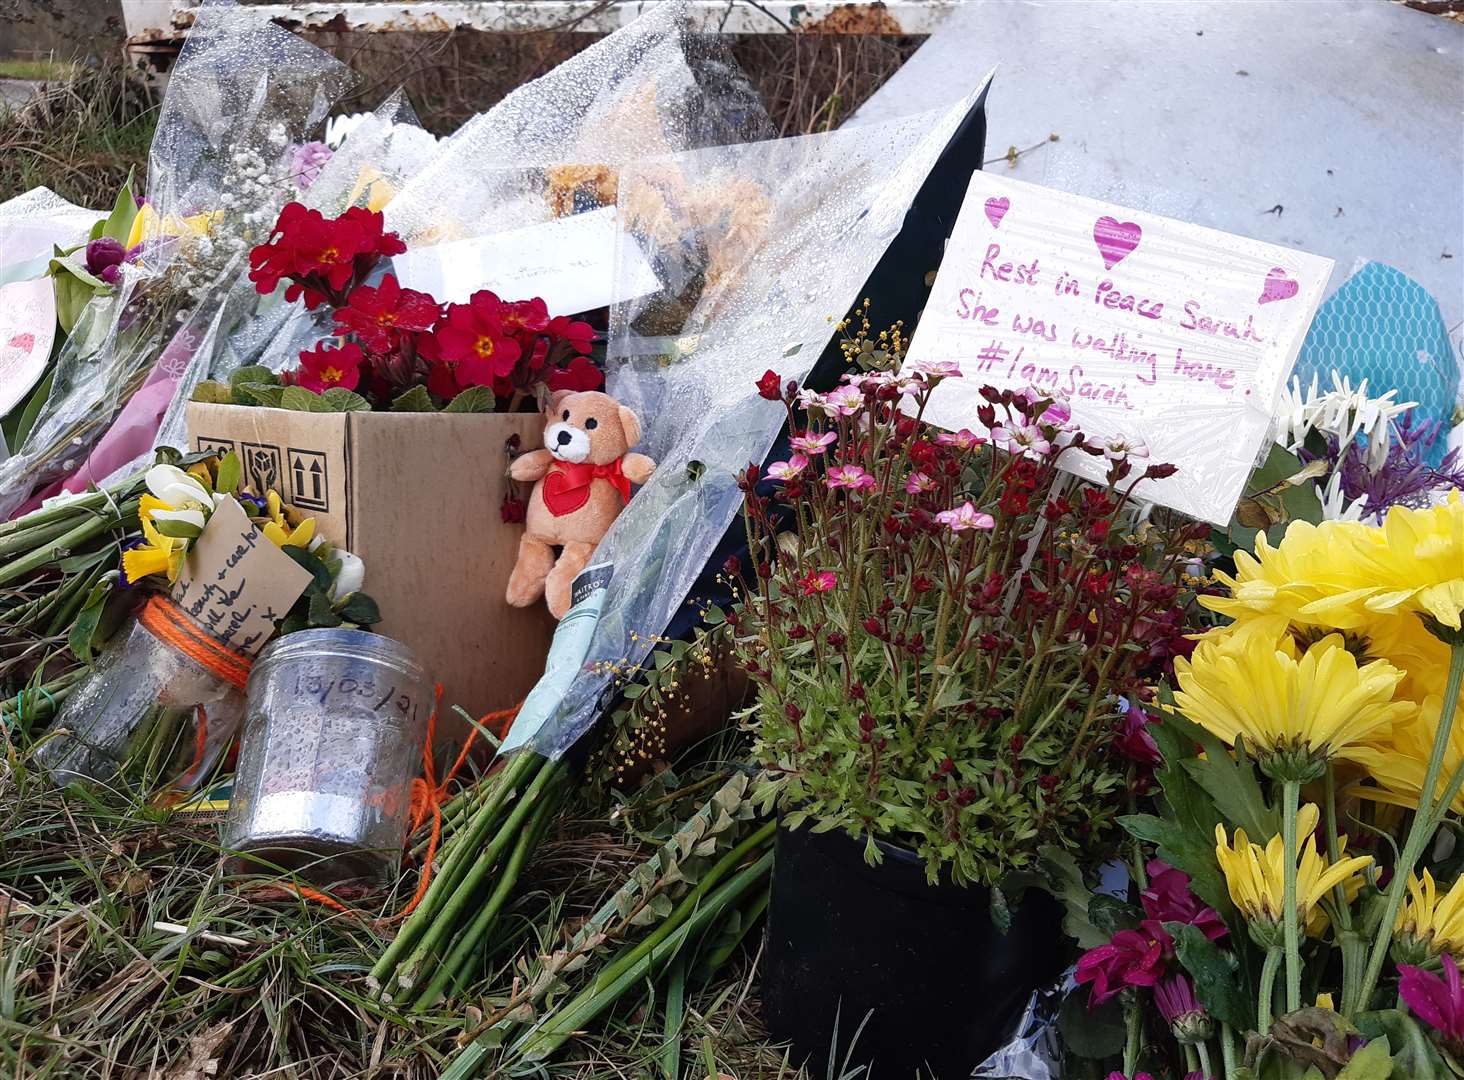 Residents have left many tributes in Bears Lane